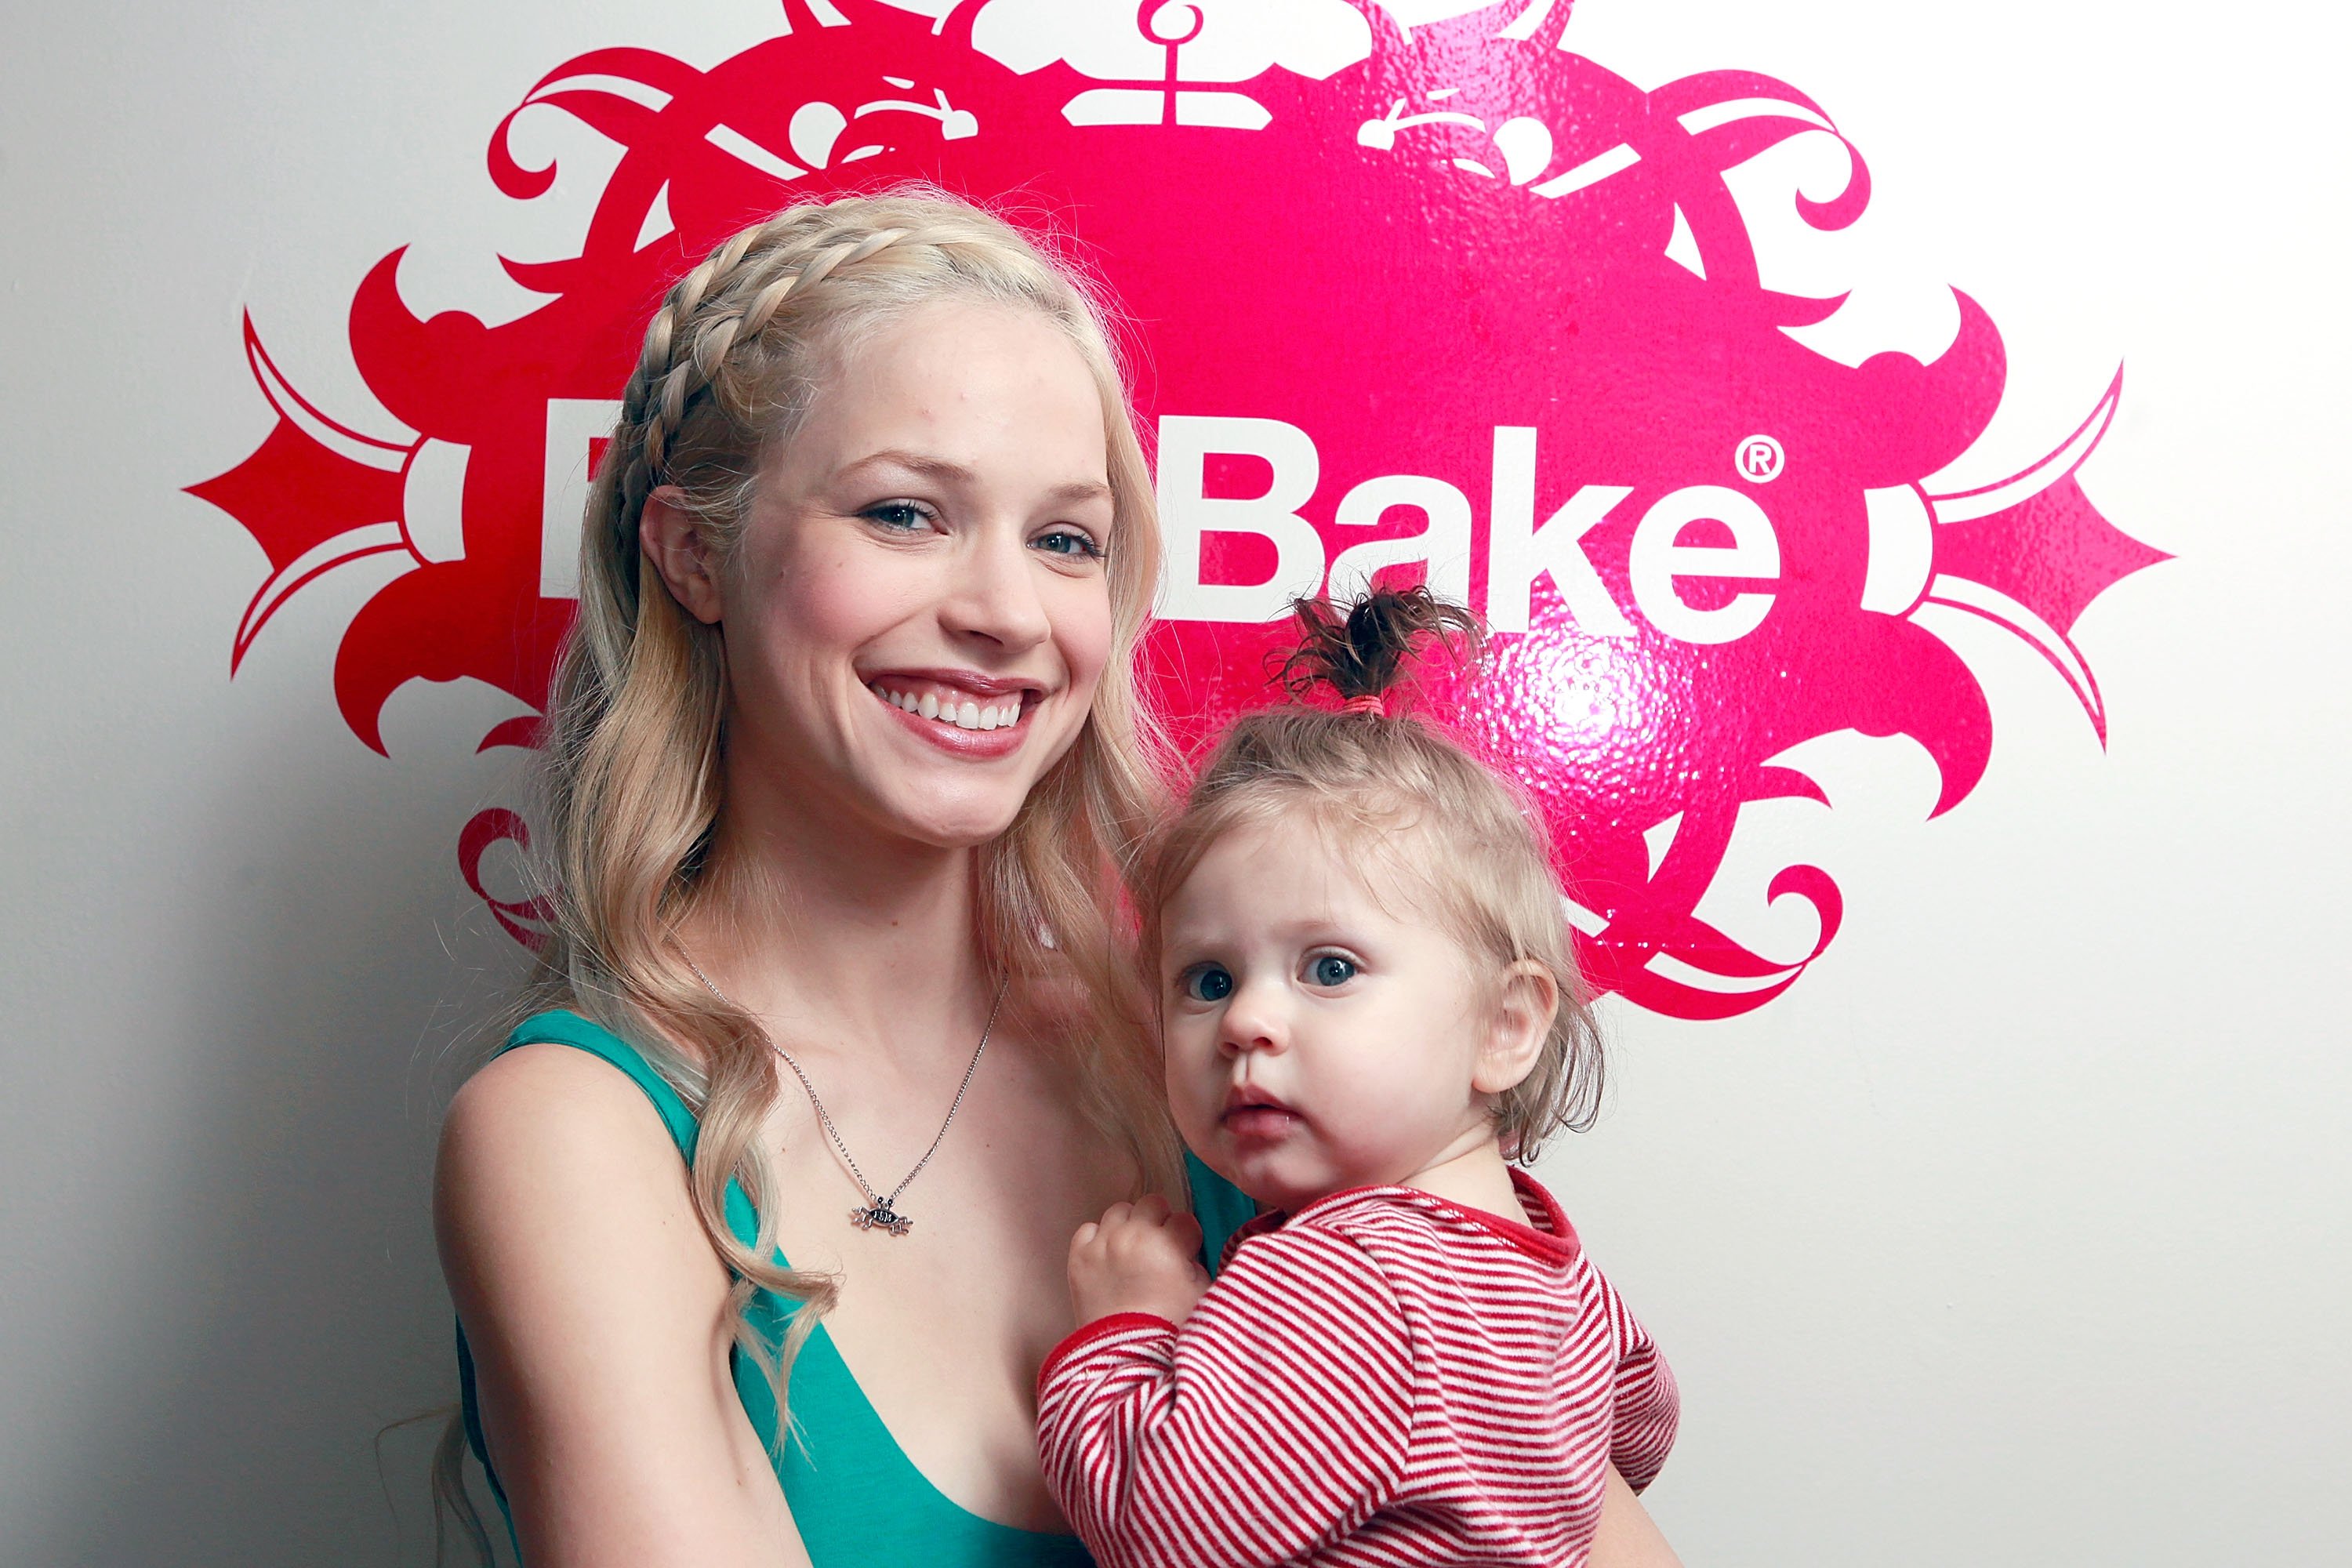 Alexis Knapp and daughter Kailani attends the Colgate Optic White Beauty Bar at Nine Zero One Salon With Skintimate, Fake Bake and Cetaphil, Produced by BMF Media on June 1, 2012 in West Hollywood, California. | Source: Getty Images